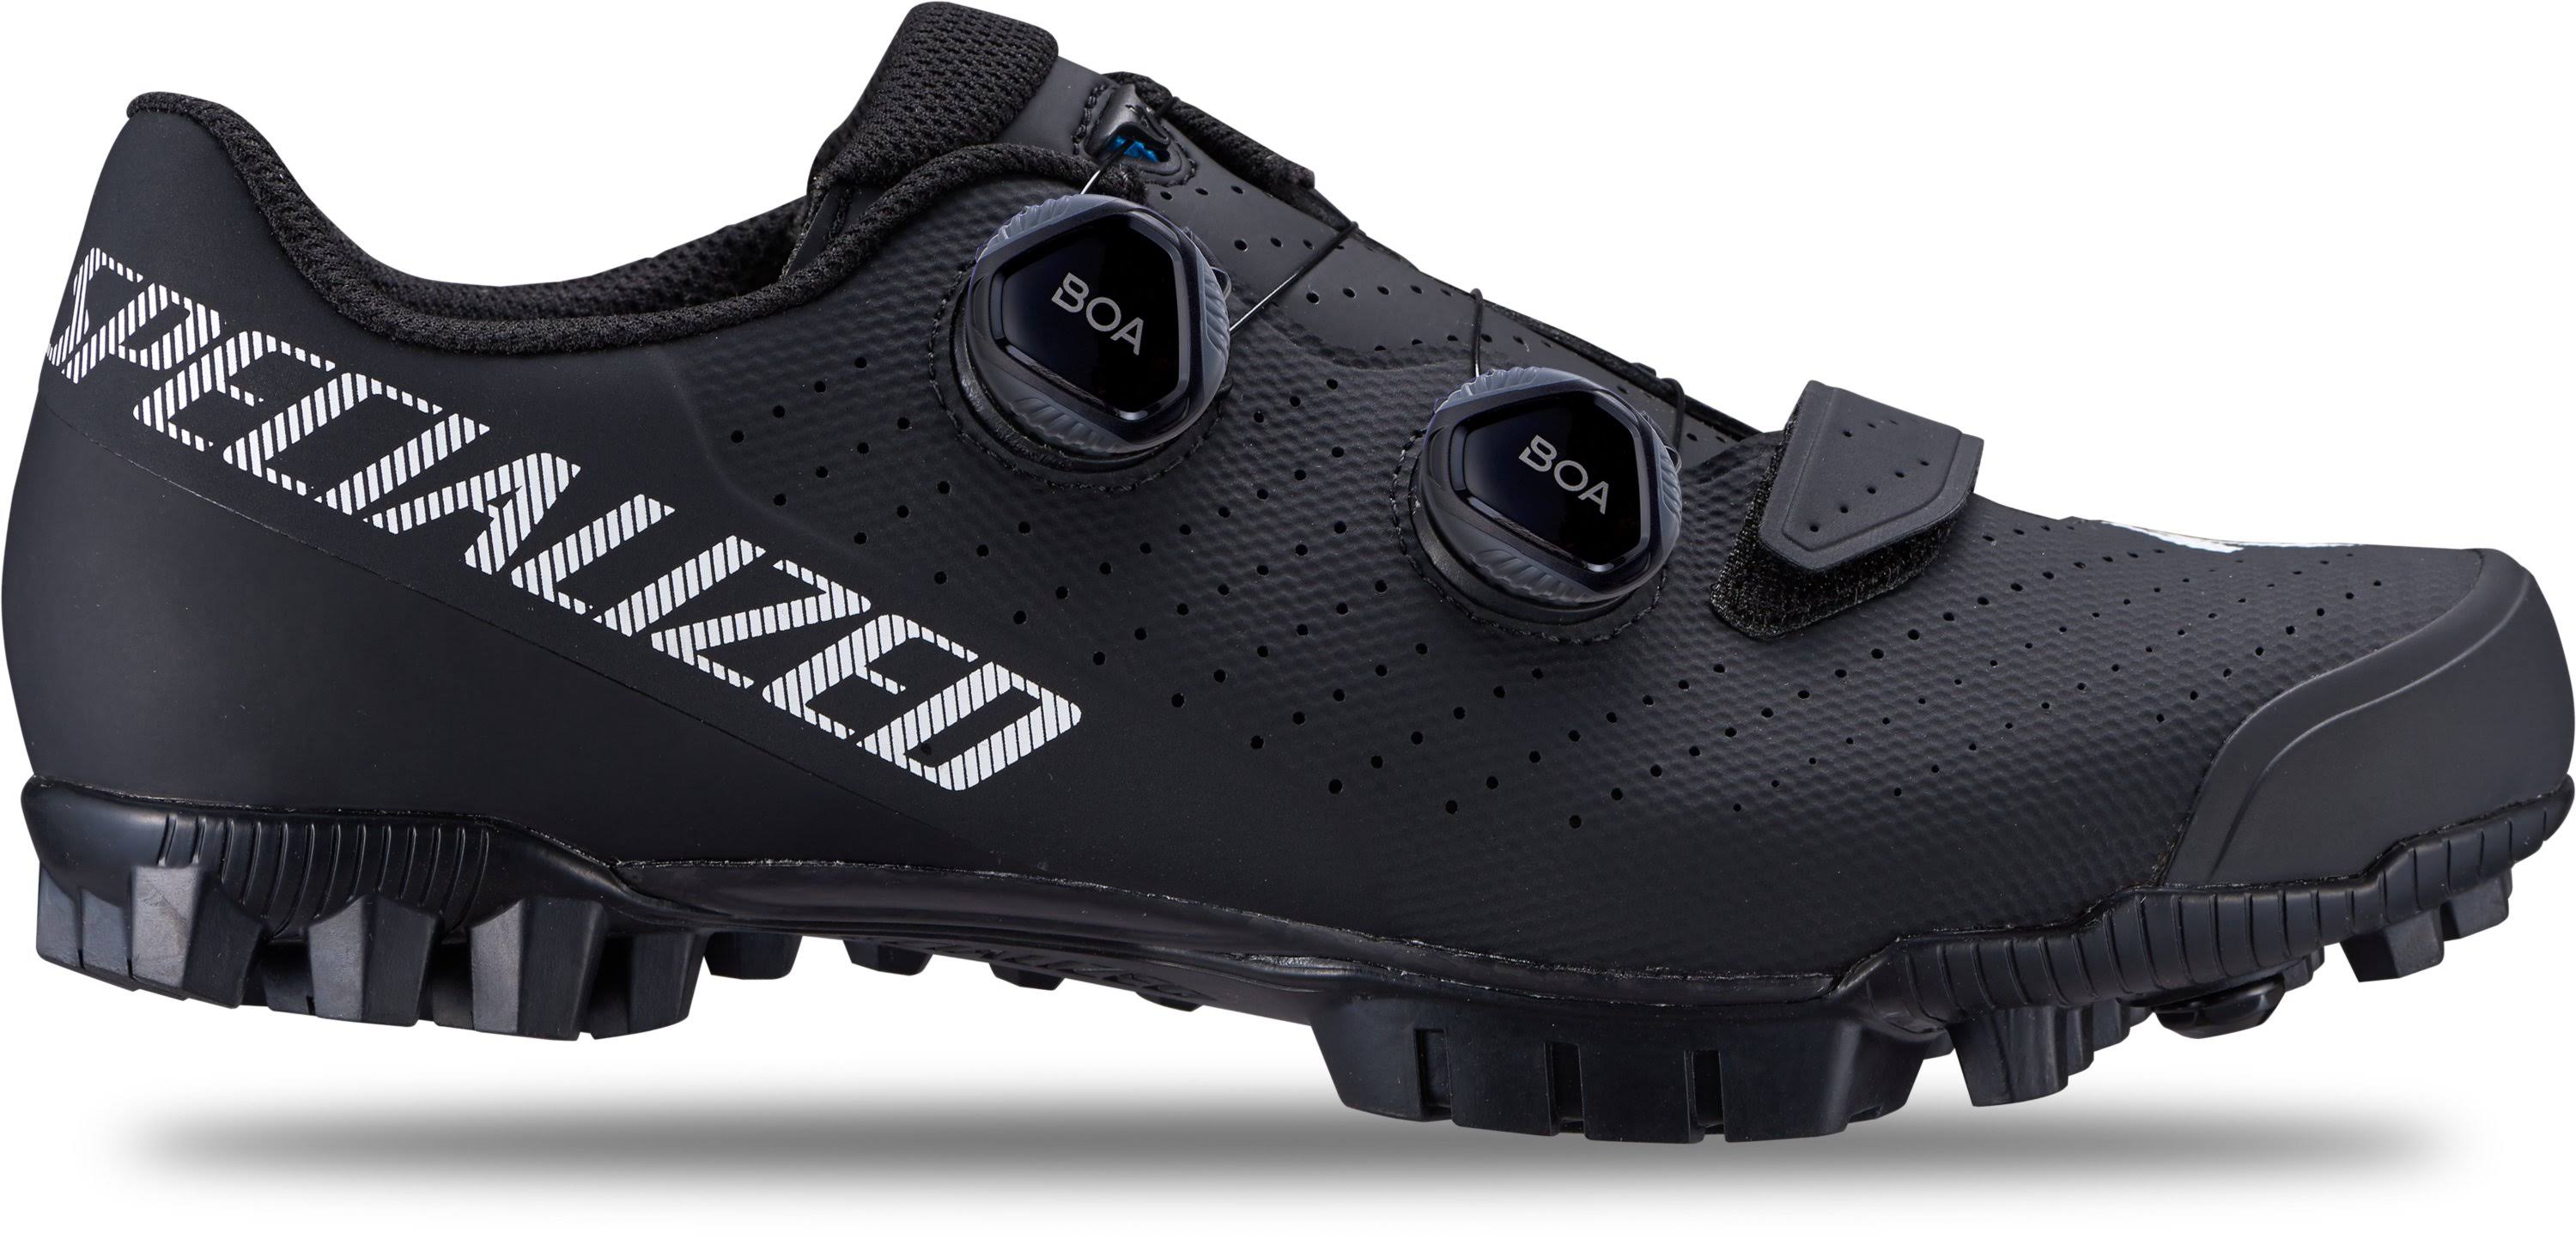 Specialized Recon 1.0 Mountain Bike Shoes - Black - 42